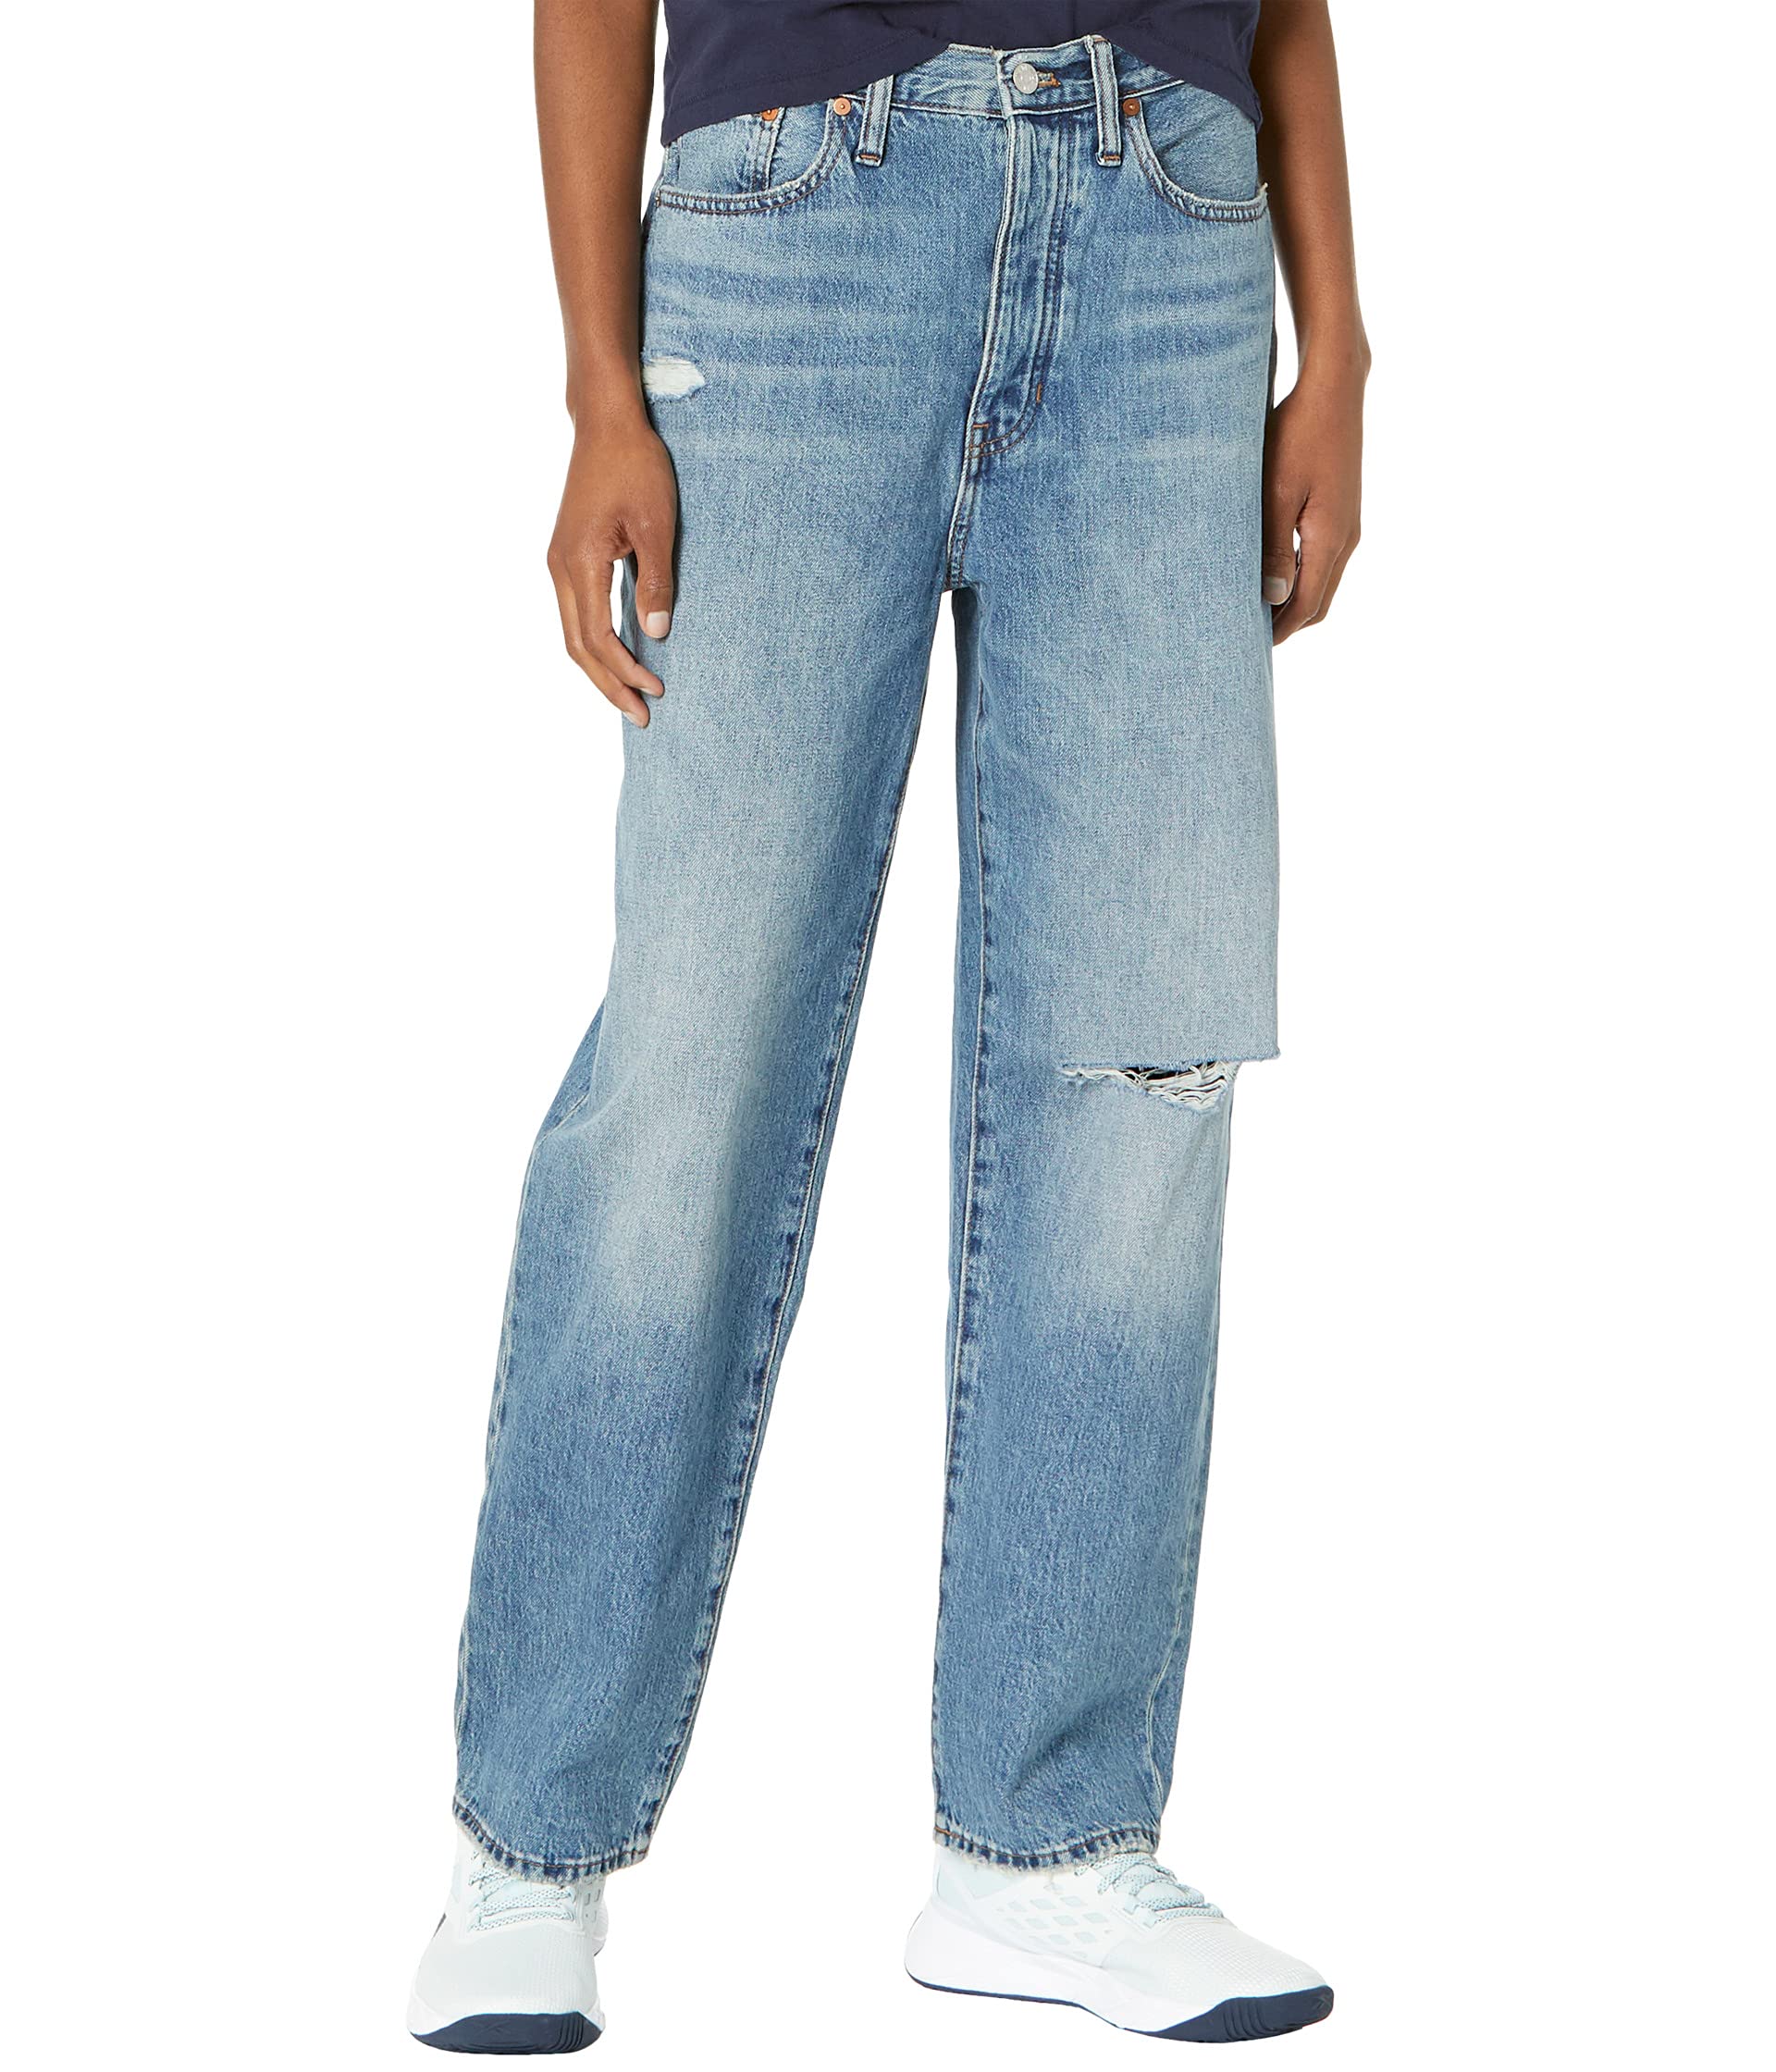 Джинсы Madewell, The Dad Jeans in Duane Wash: Ripped Edition duane wade